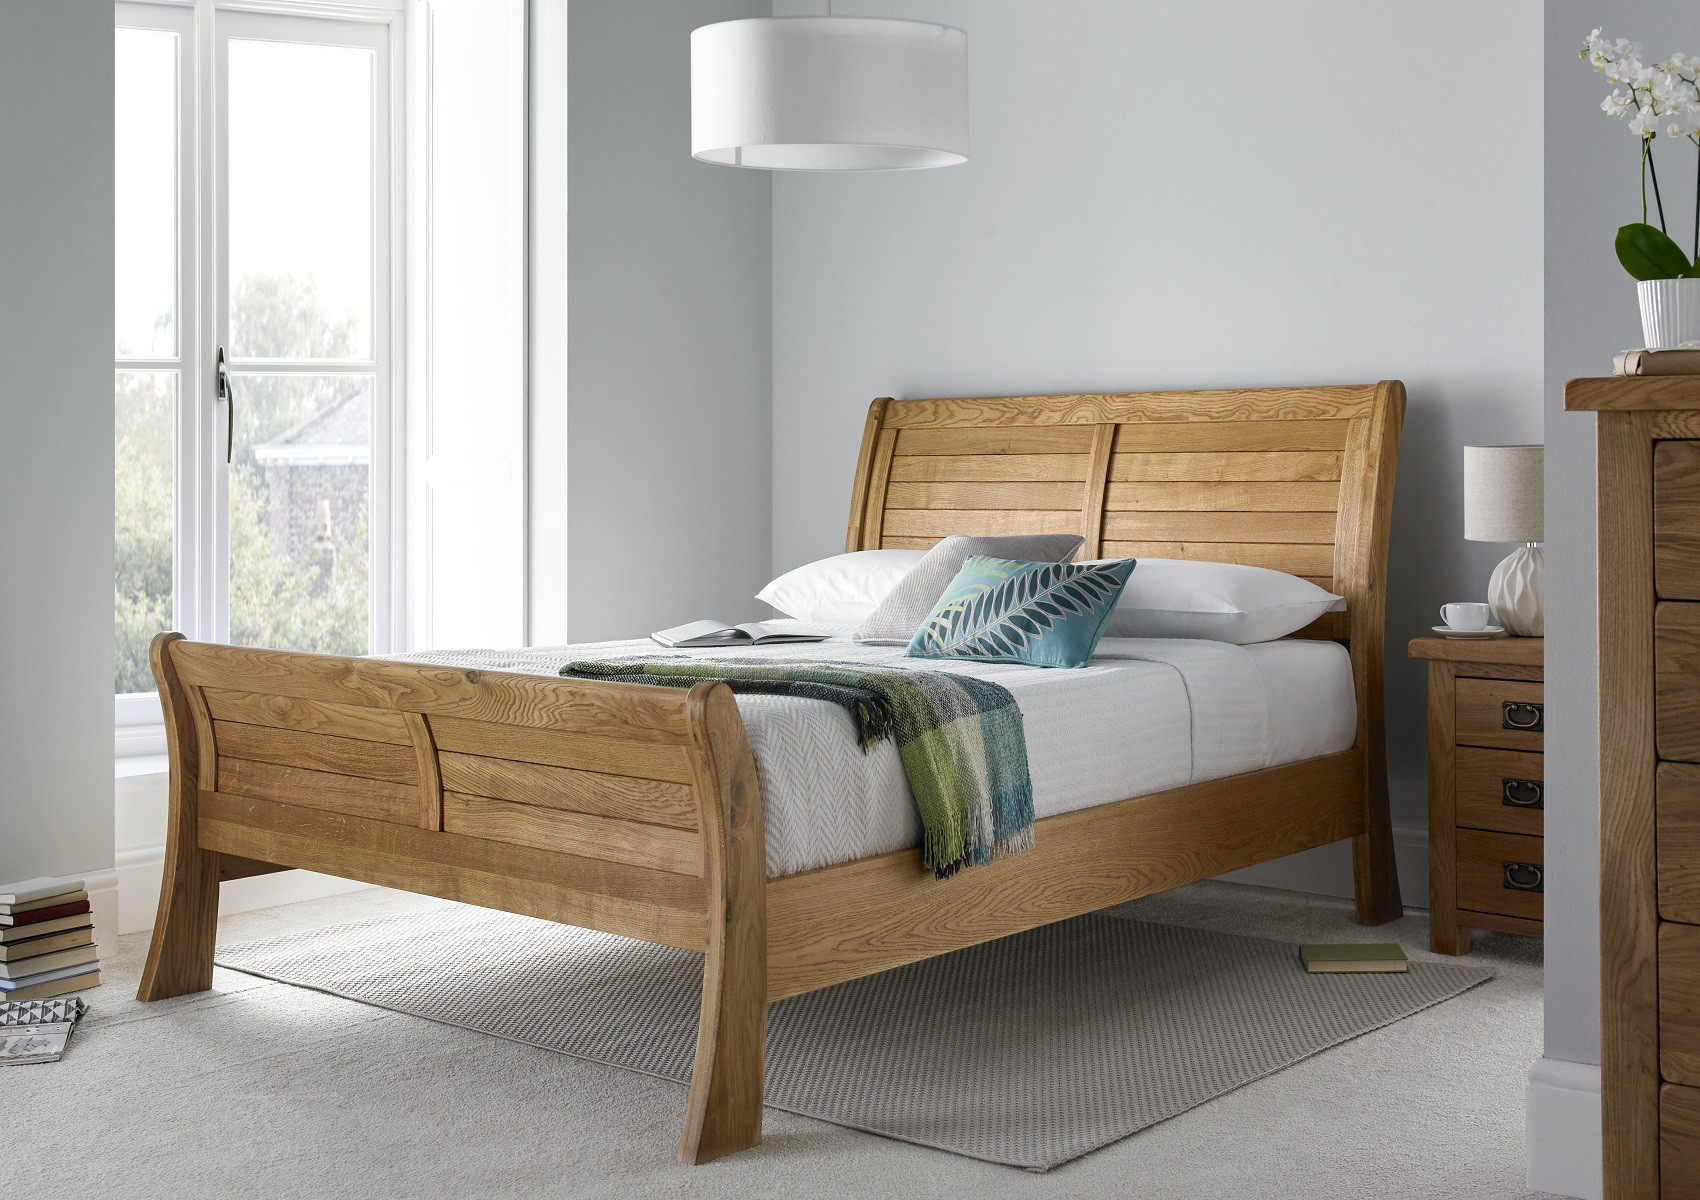 Bed Frame Ing Guide Types Of, Wooden Bed Frame Styles